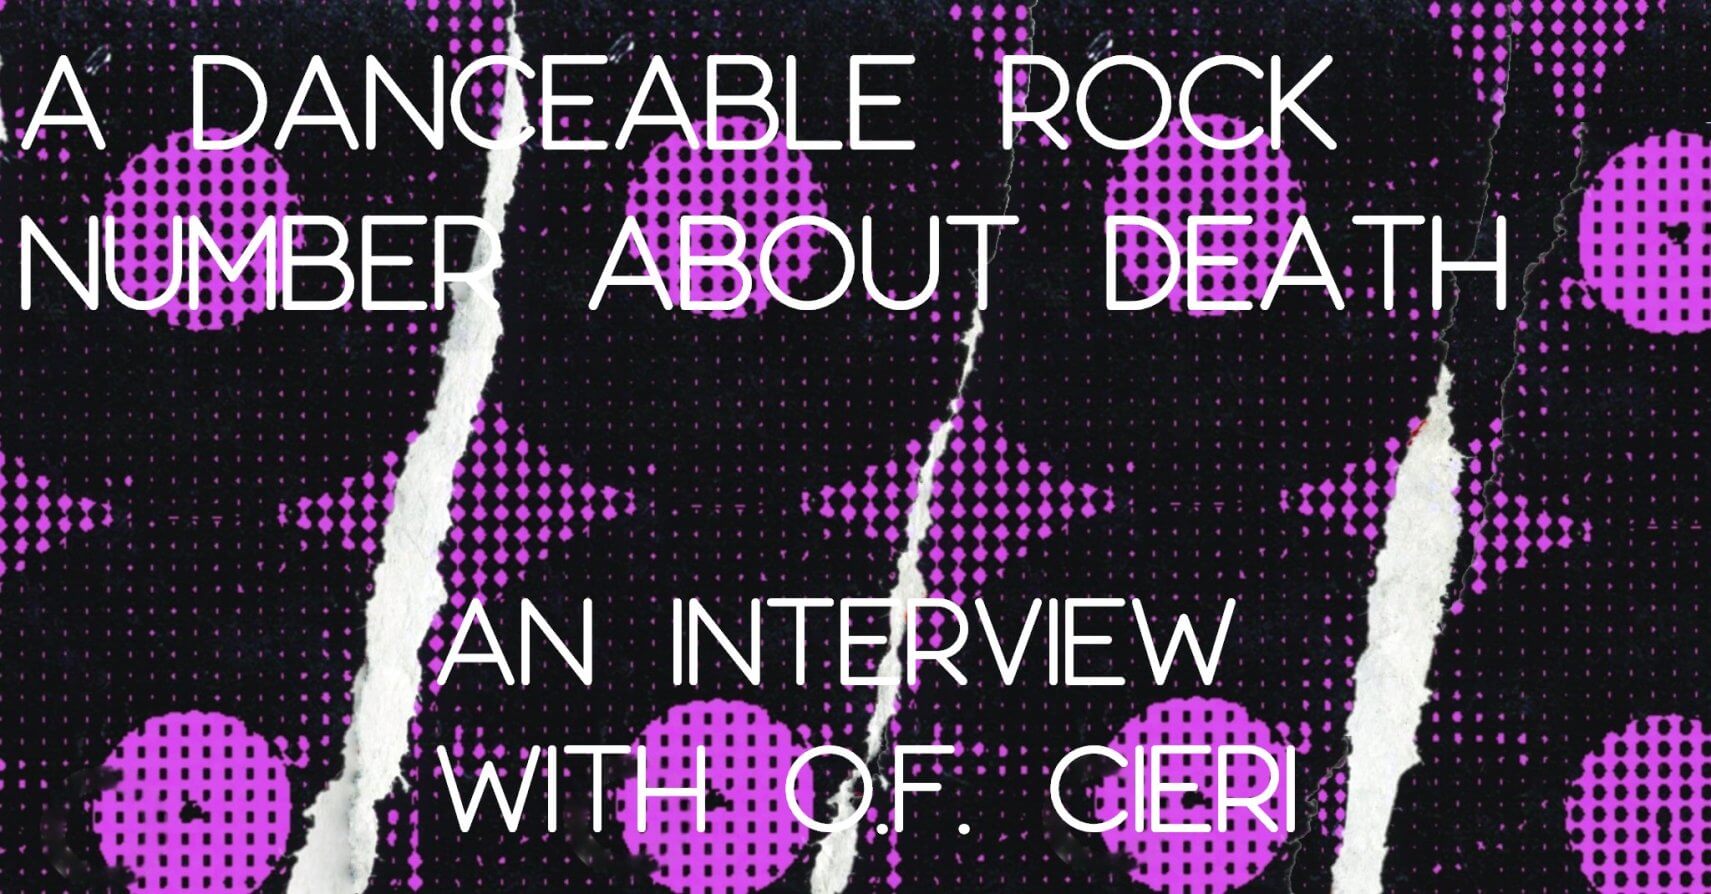 A DANCEABLE ROCK NUMBER ABOUT DEATH: An Interview with O.F. Cieri